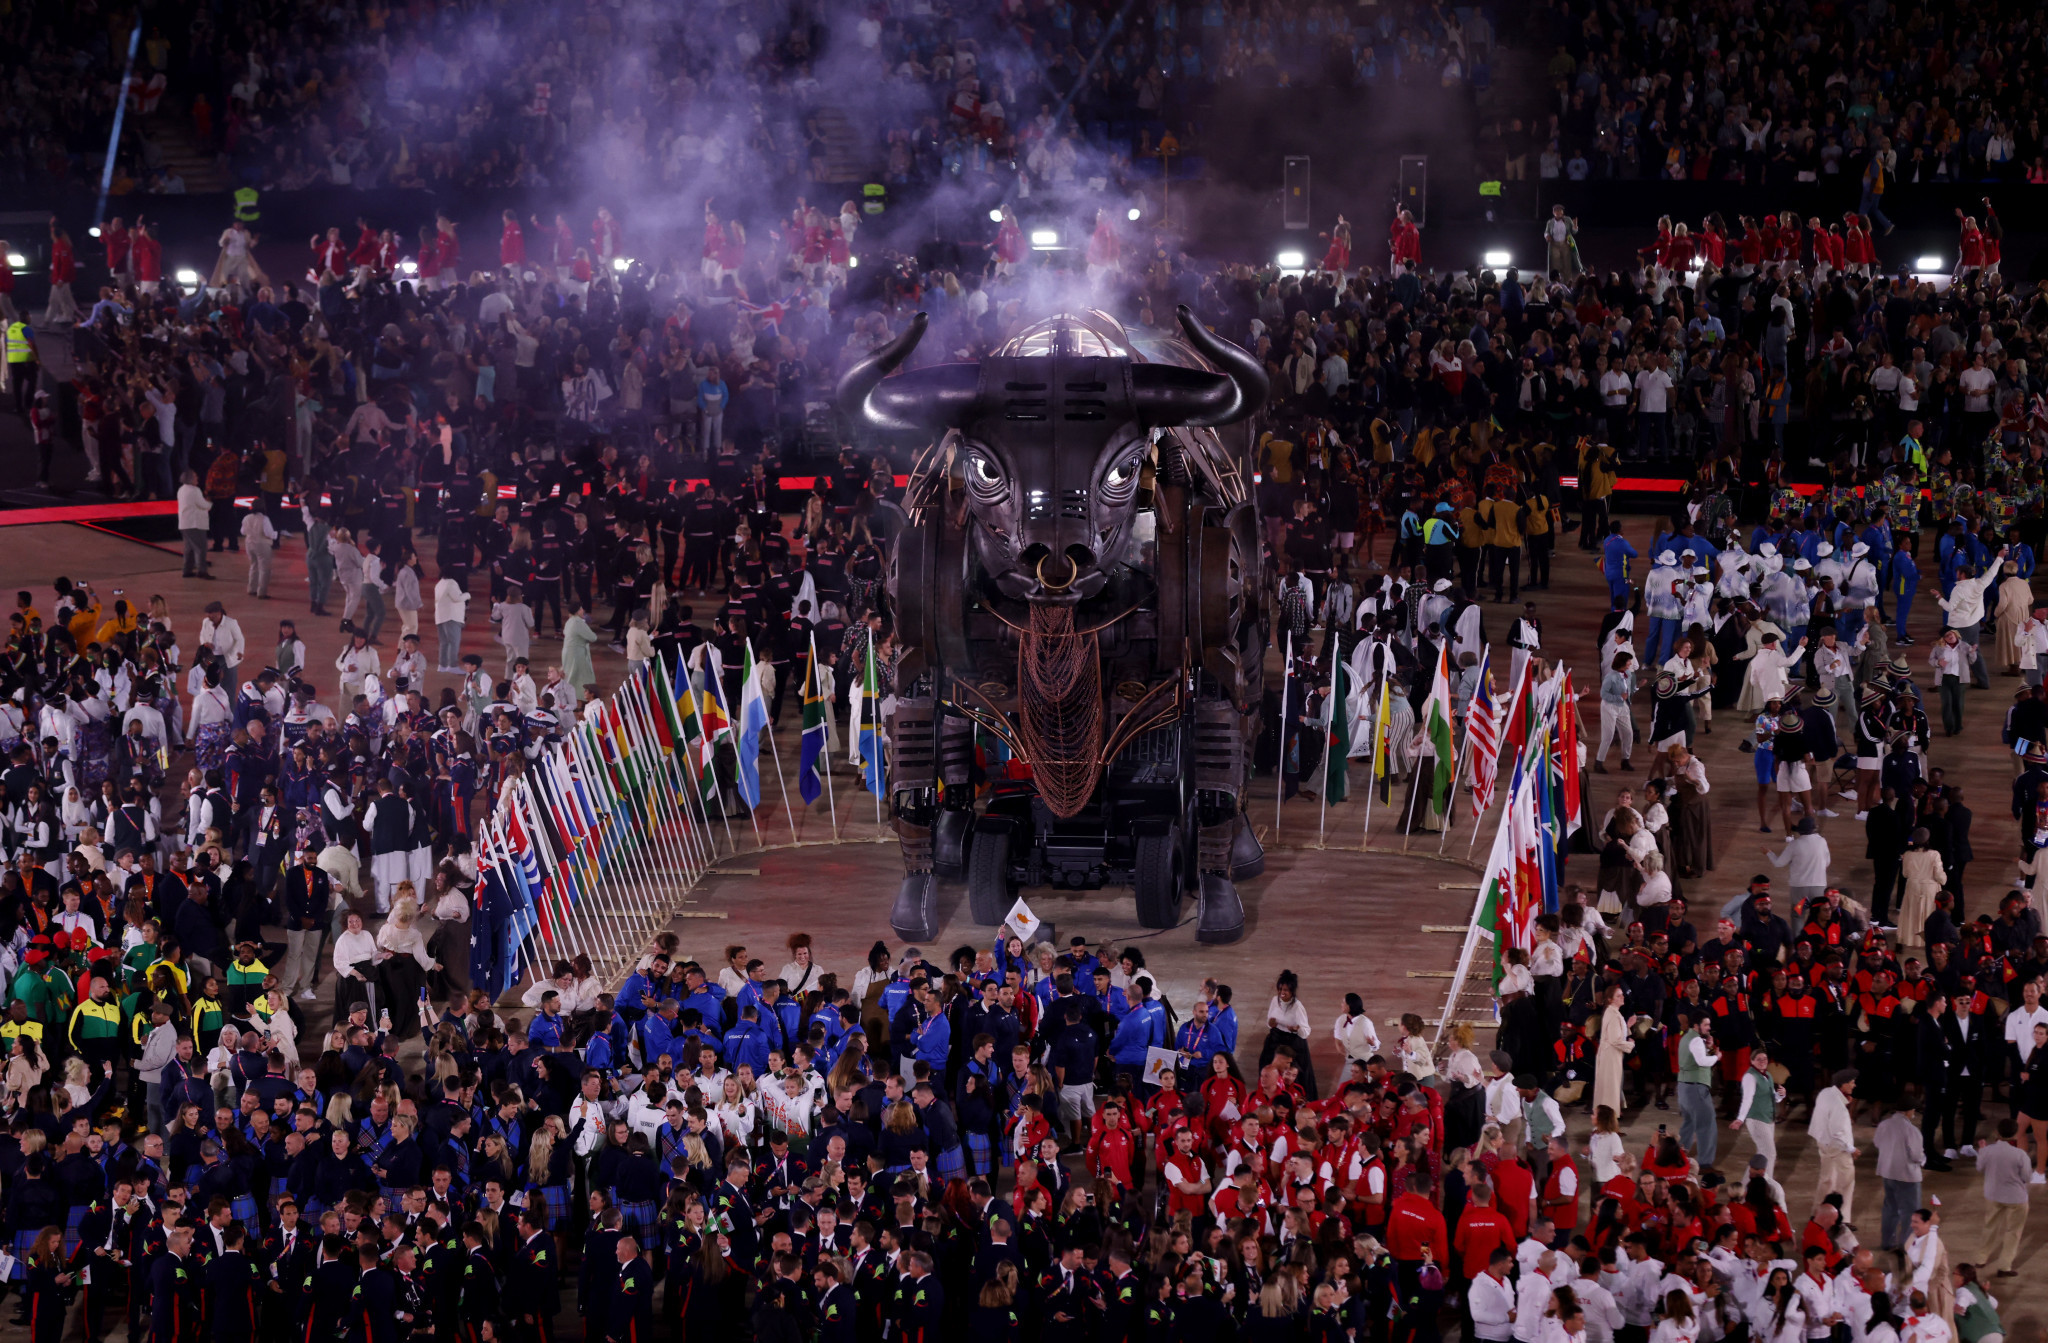 The bull was originally built as a prop for the Birmingham 2022 Opening Ceremony ©Getty Images